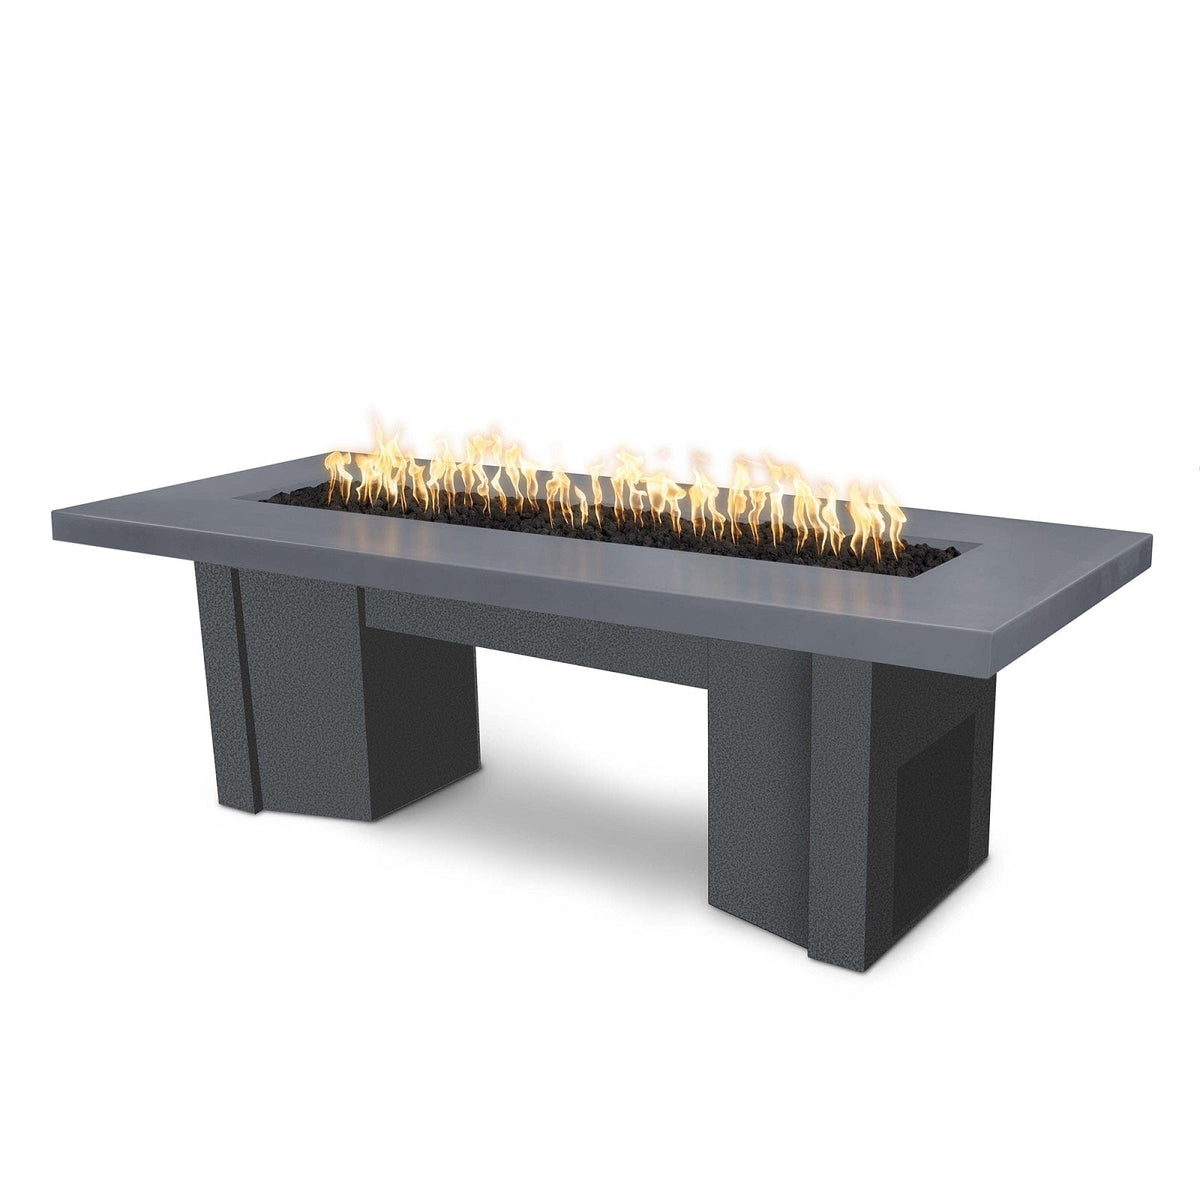 The Outdoor Plus Fire Features Gray (-GRY) / Silver Vein Powder Coated Steel (-SLV) The Outdoor Plus 60&quot; Alameda Fire Table Smooth Concrete in Liquid Propane - 110V Plug &amp; Play Electronic Ignition / OPT-ALMGFRC60EKIT-LP